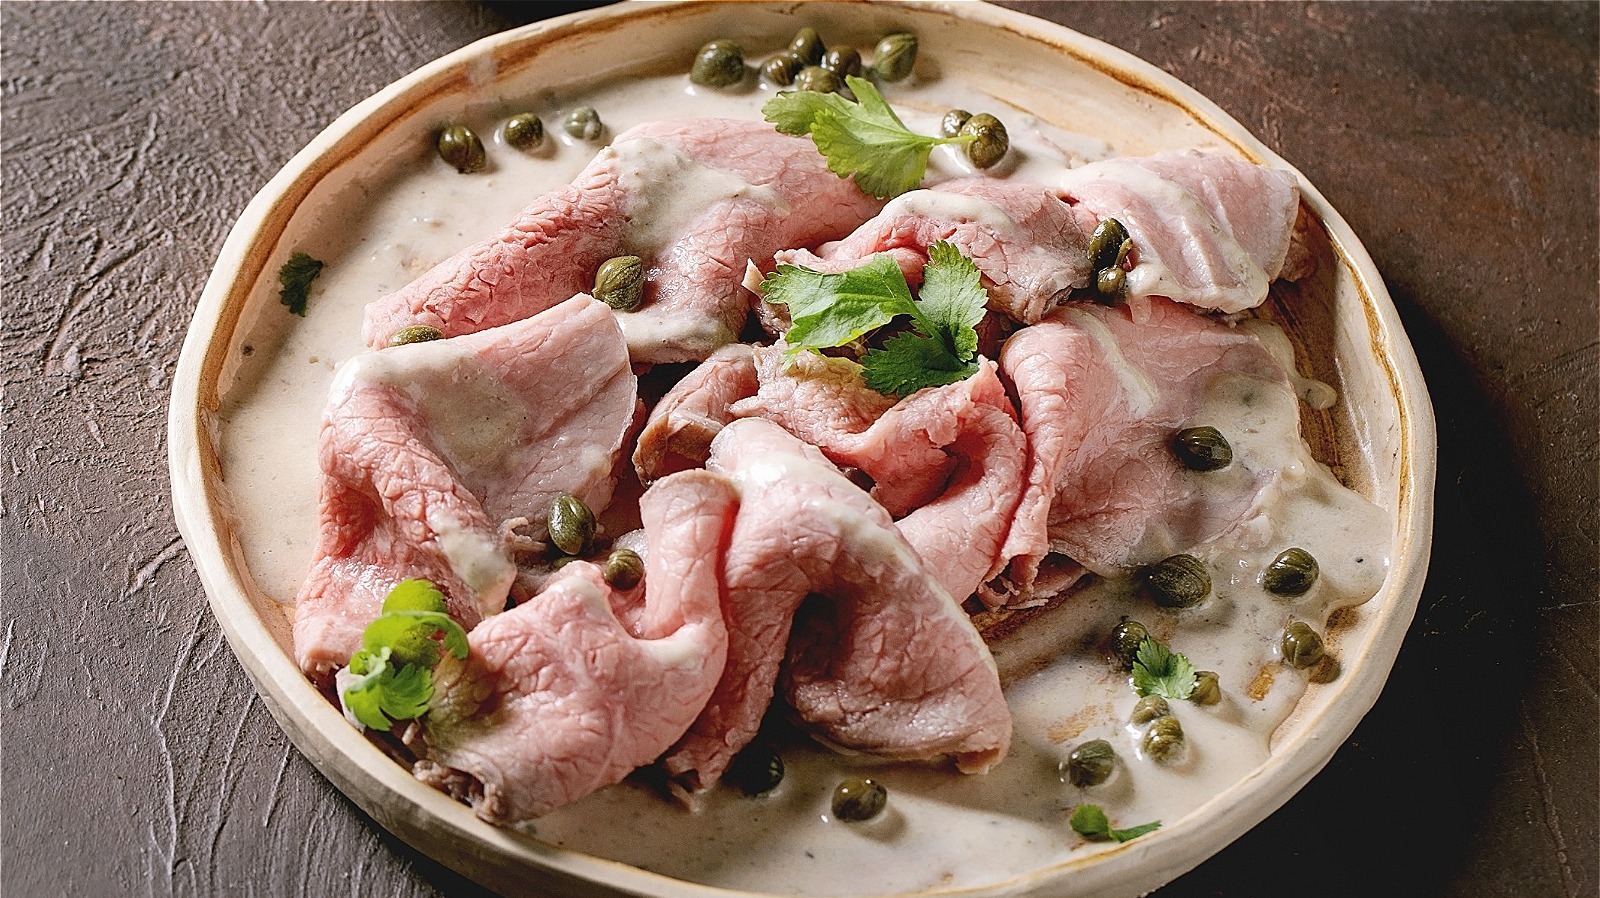 What Is Vitello Tonnato And What Does It Taste Like?